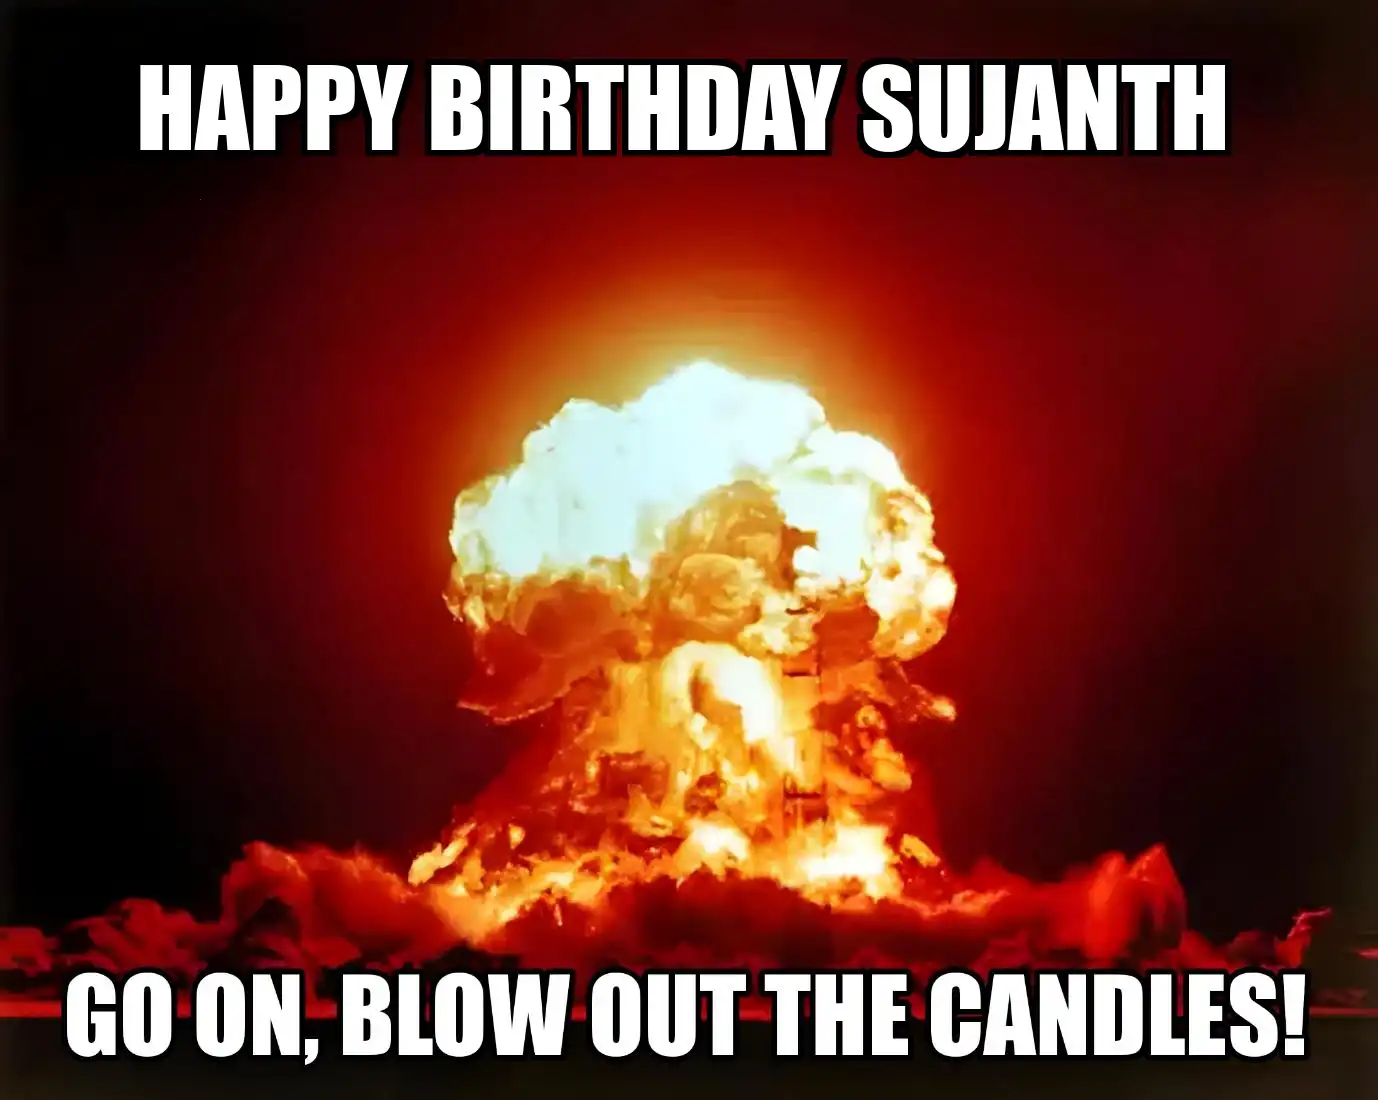 Happy Birthday Sujanth Go On Blow Out The Candles Meme